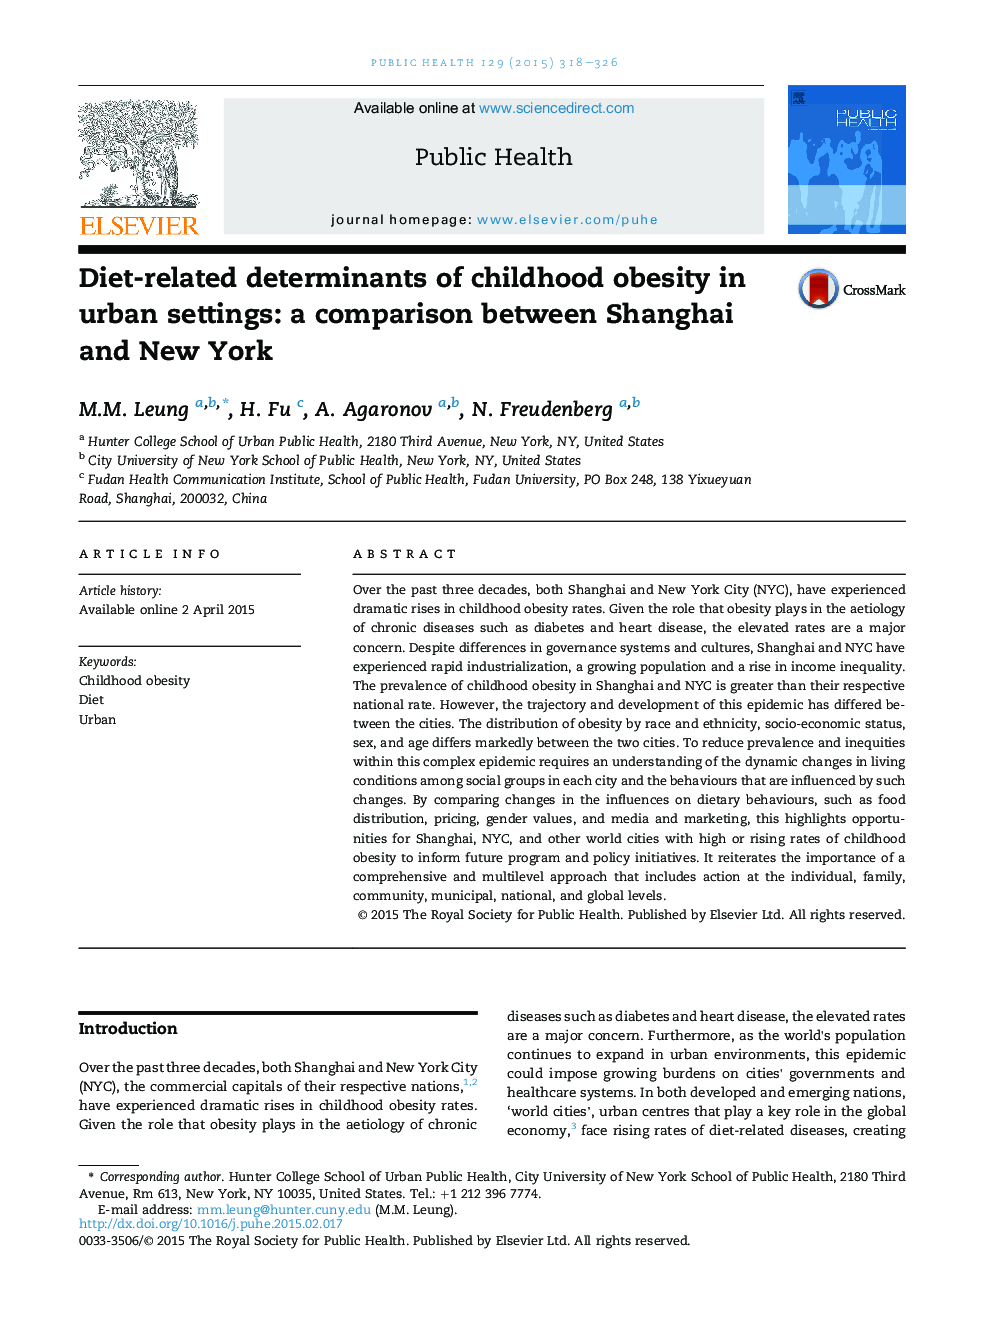 Diet-related determinants of childhood obesity in urban settings: a comparison between Shanghai and New York